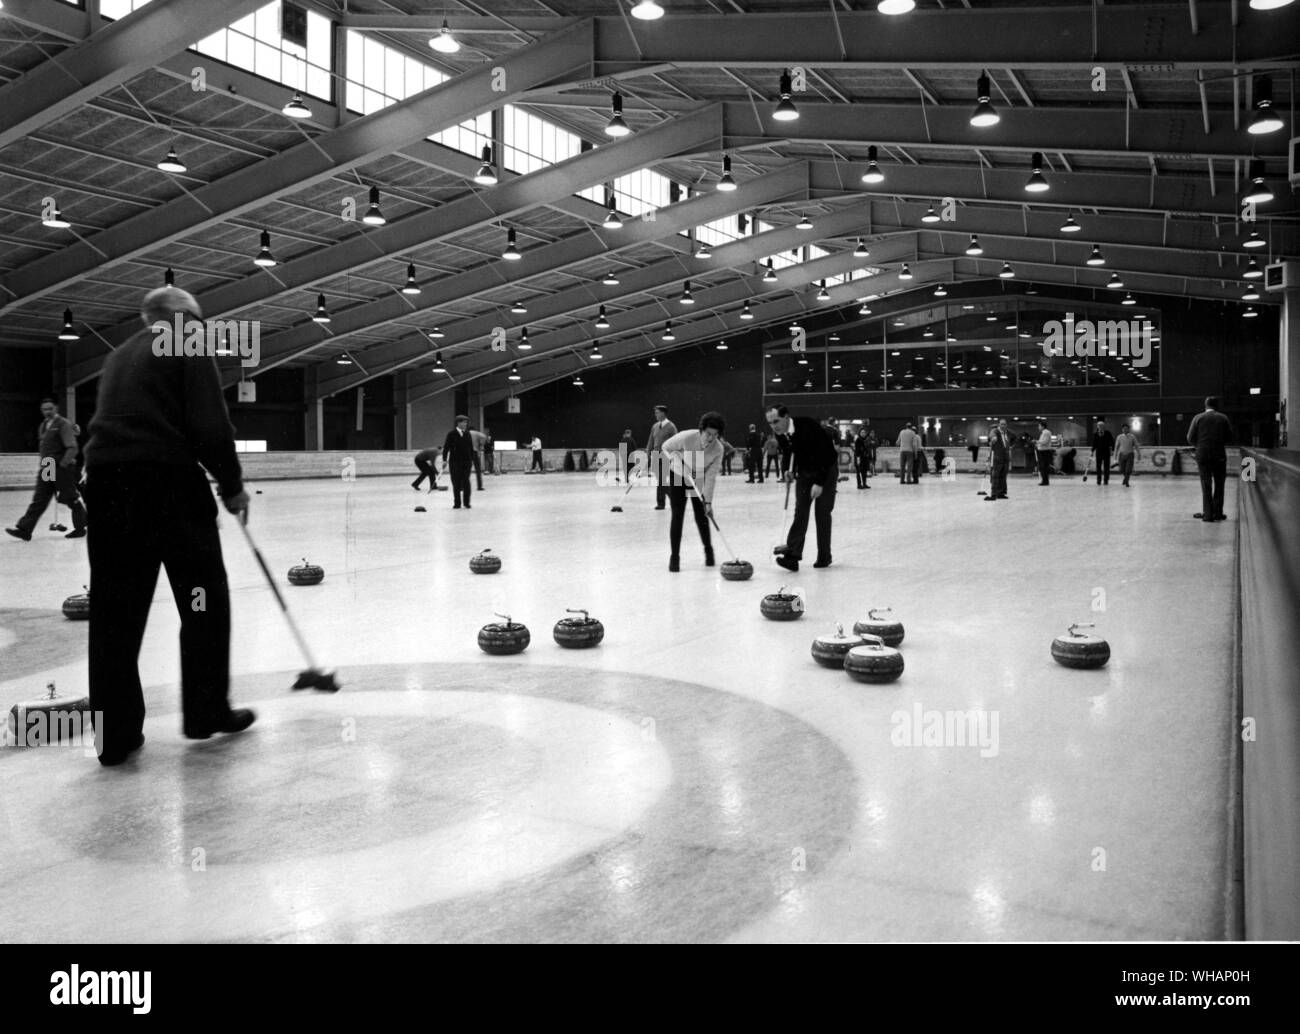 Aviemore Centre Scotland. Among the most impressive of the many facilities at the Aviemore Centre is this skating and curling rink, which has an area of 20,000 square feet. The highly polished curling stones weigh over 40 pounds. The rink has its own snack bar, and an attractive bar where one can sit and watch the sport. Stock Photo